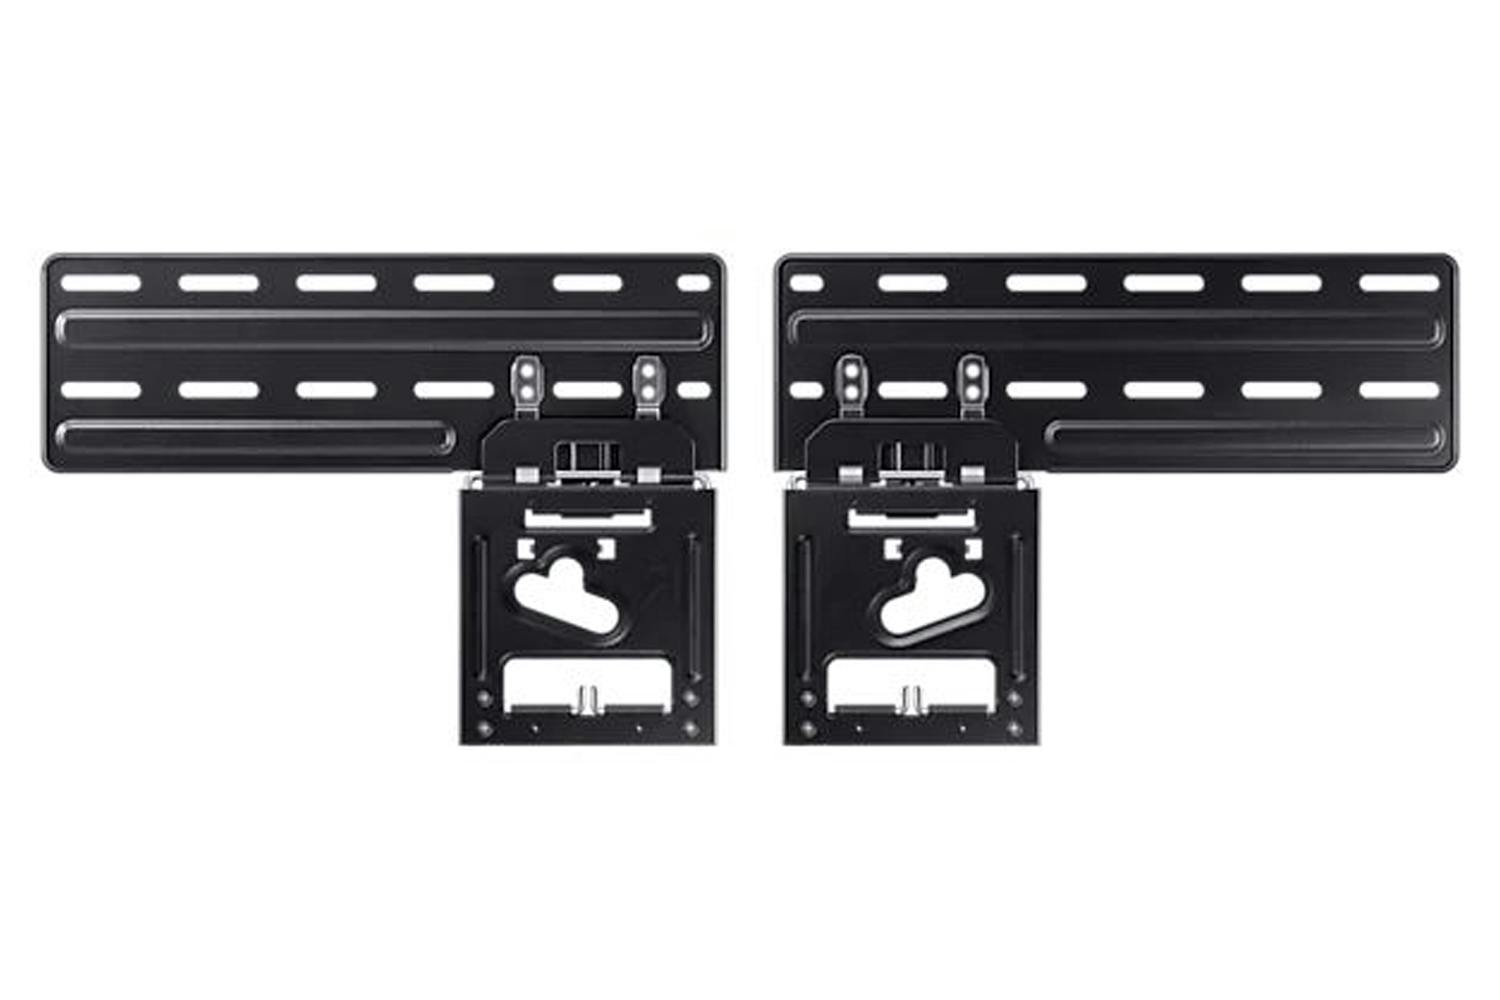 Samsung Slim Fit Wall Mount For 43"- 85" TVs (2021) | WMN-A50EB/XC